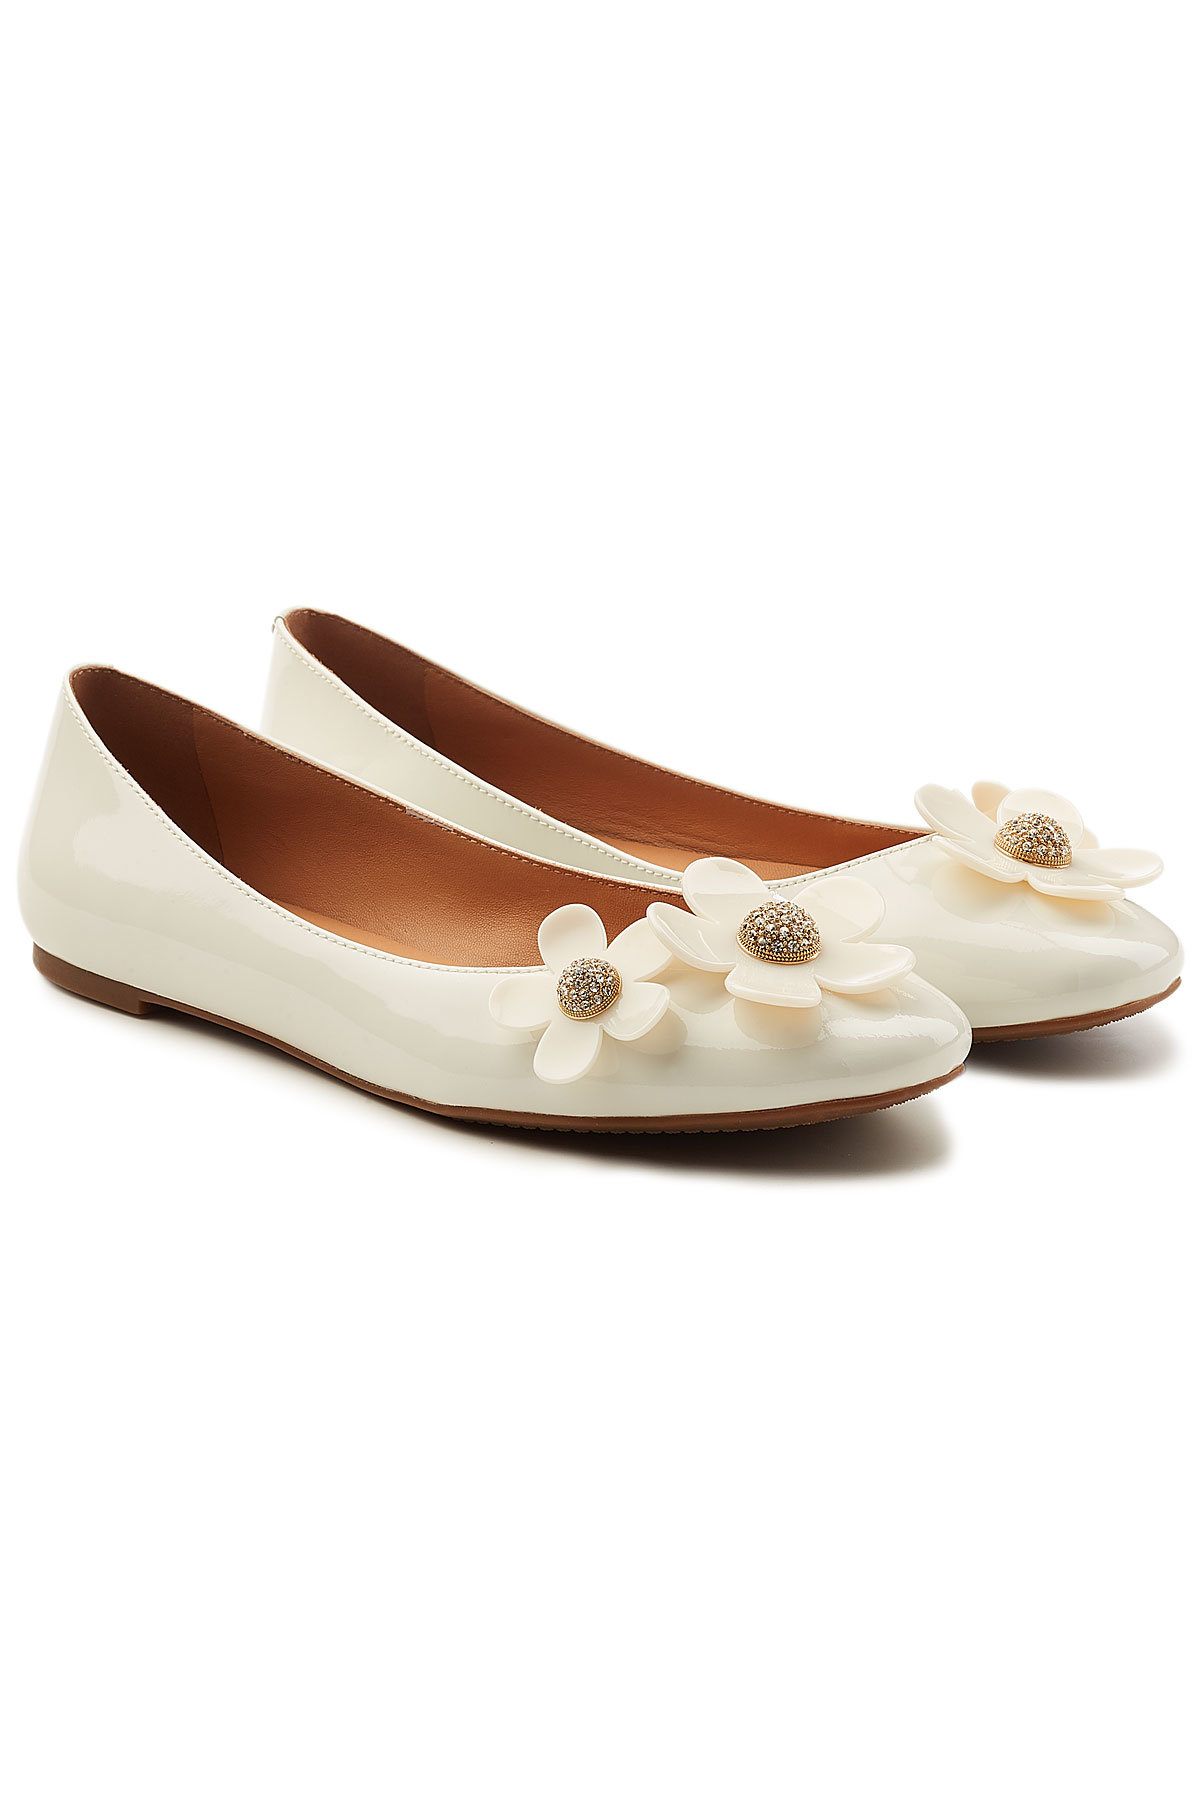 Marc Jacobs - Daisy Patent Leather Ballerinas